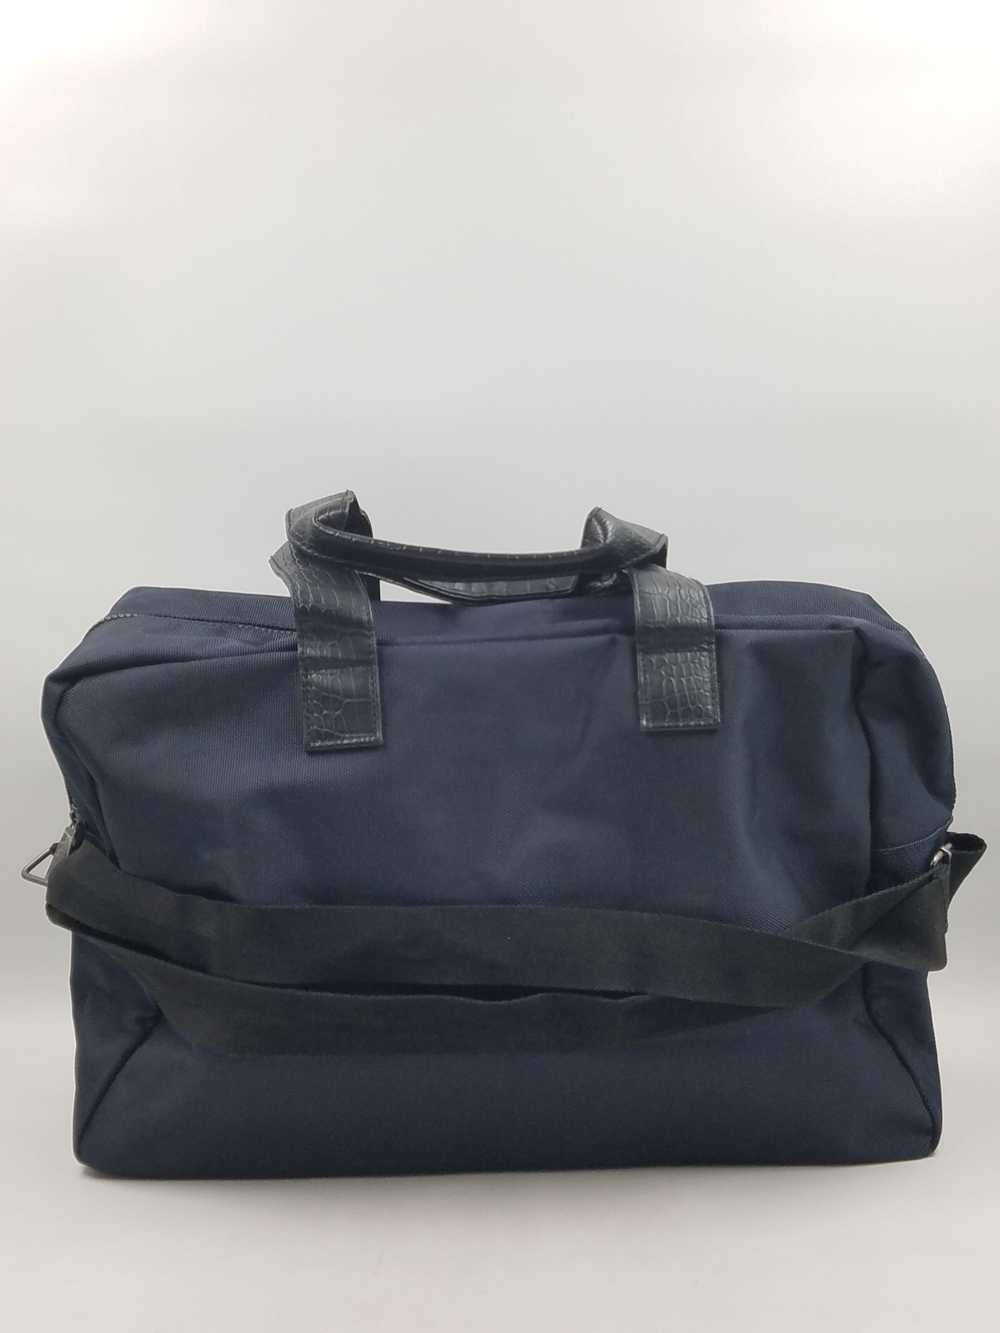 Authentic Jimmy Choo Parfums Navy Duffle Bag - image 2